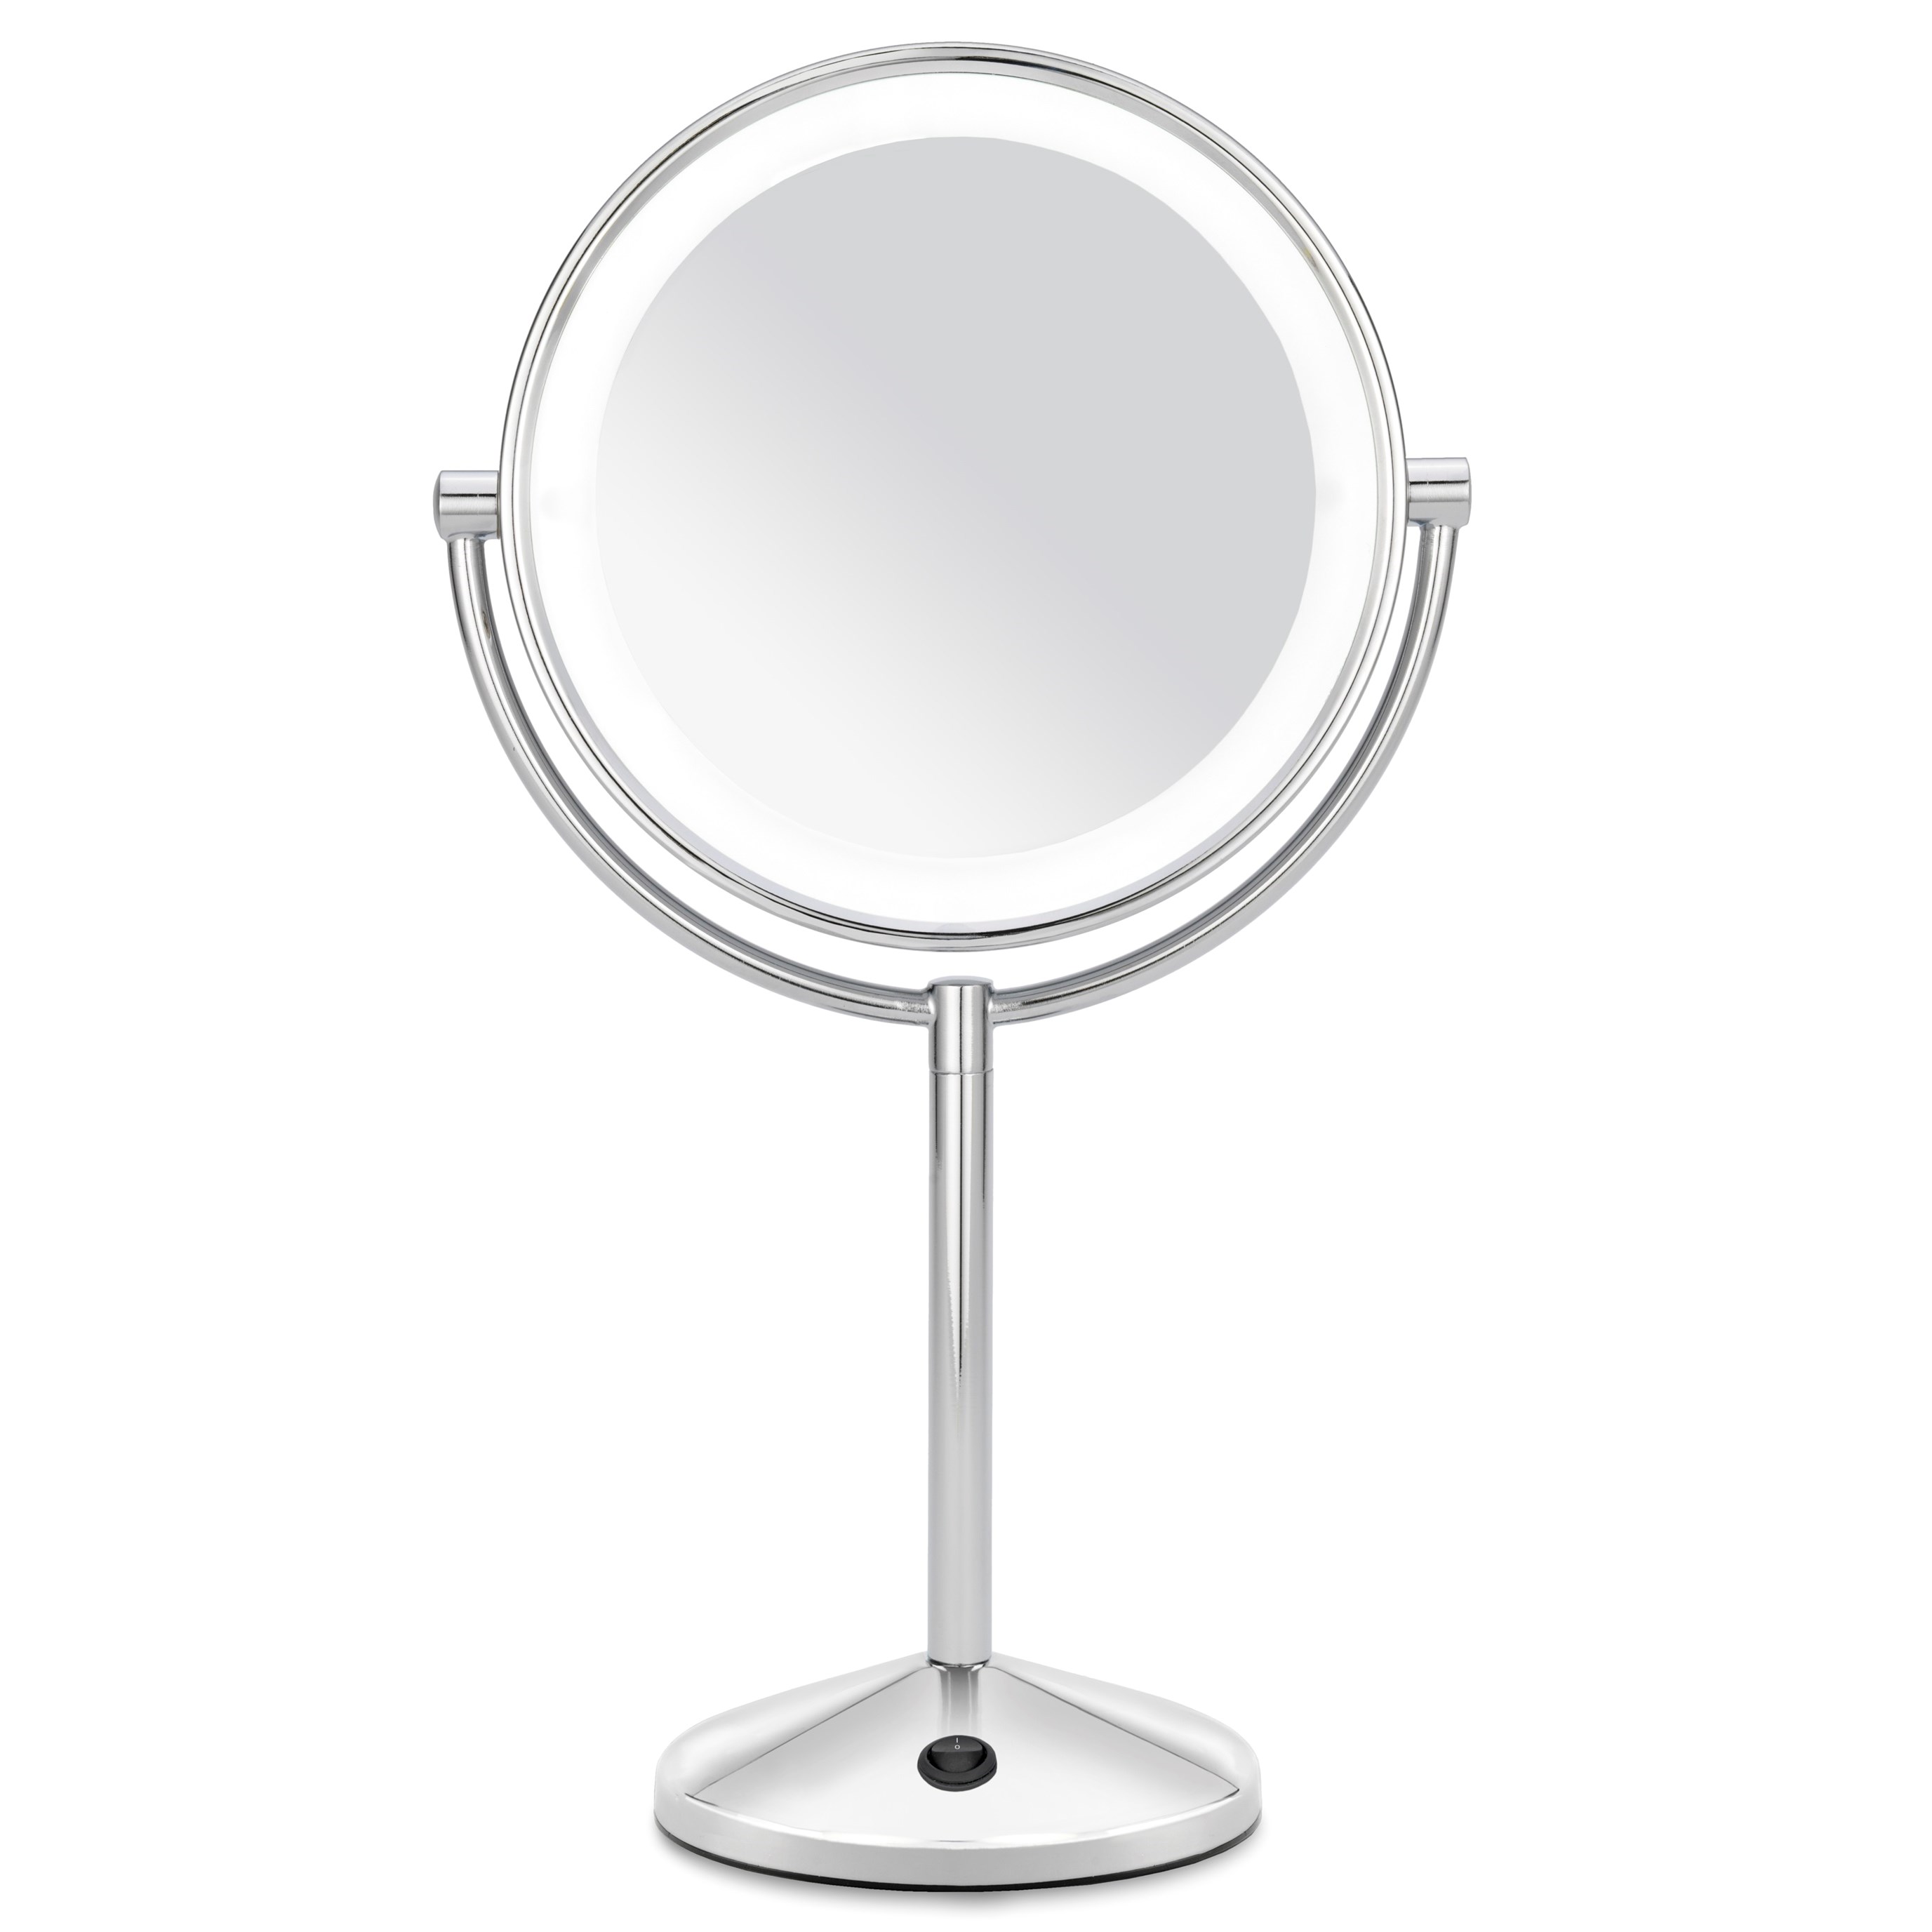 Babyliss Lighted Makeup Mirror - 9436E